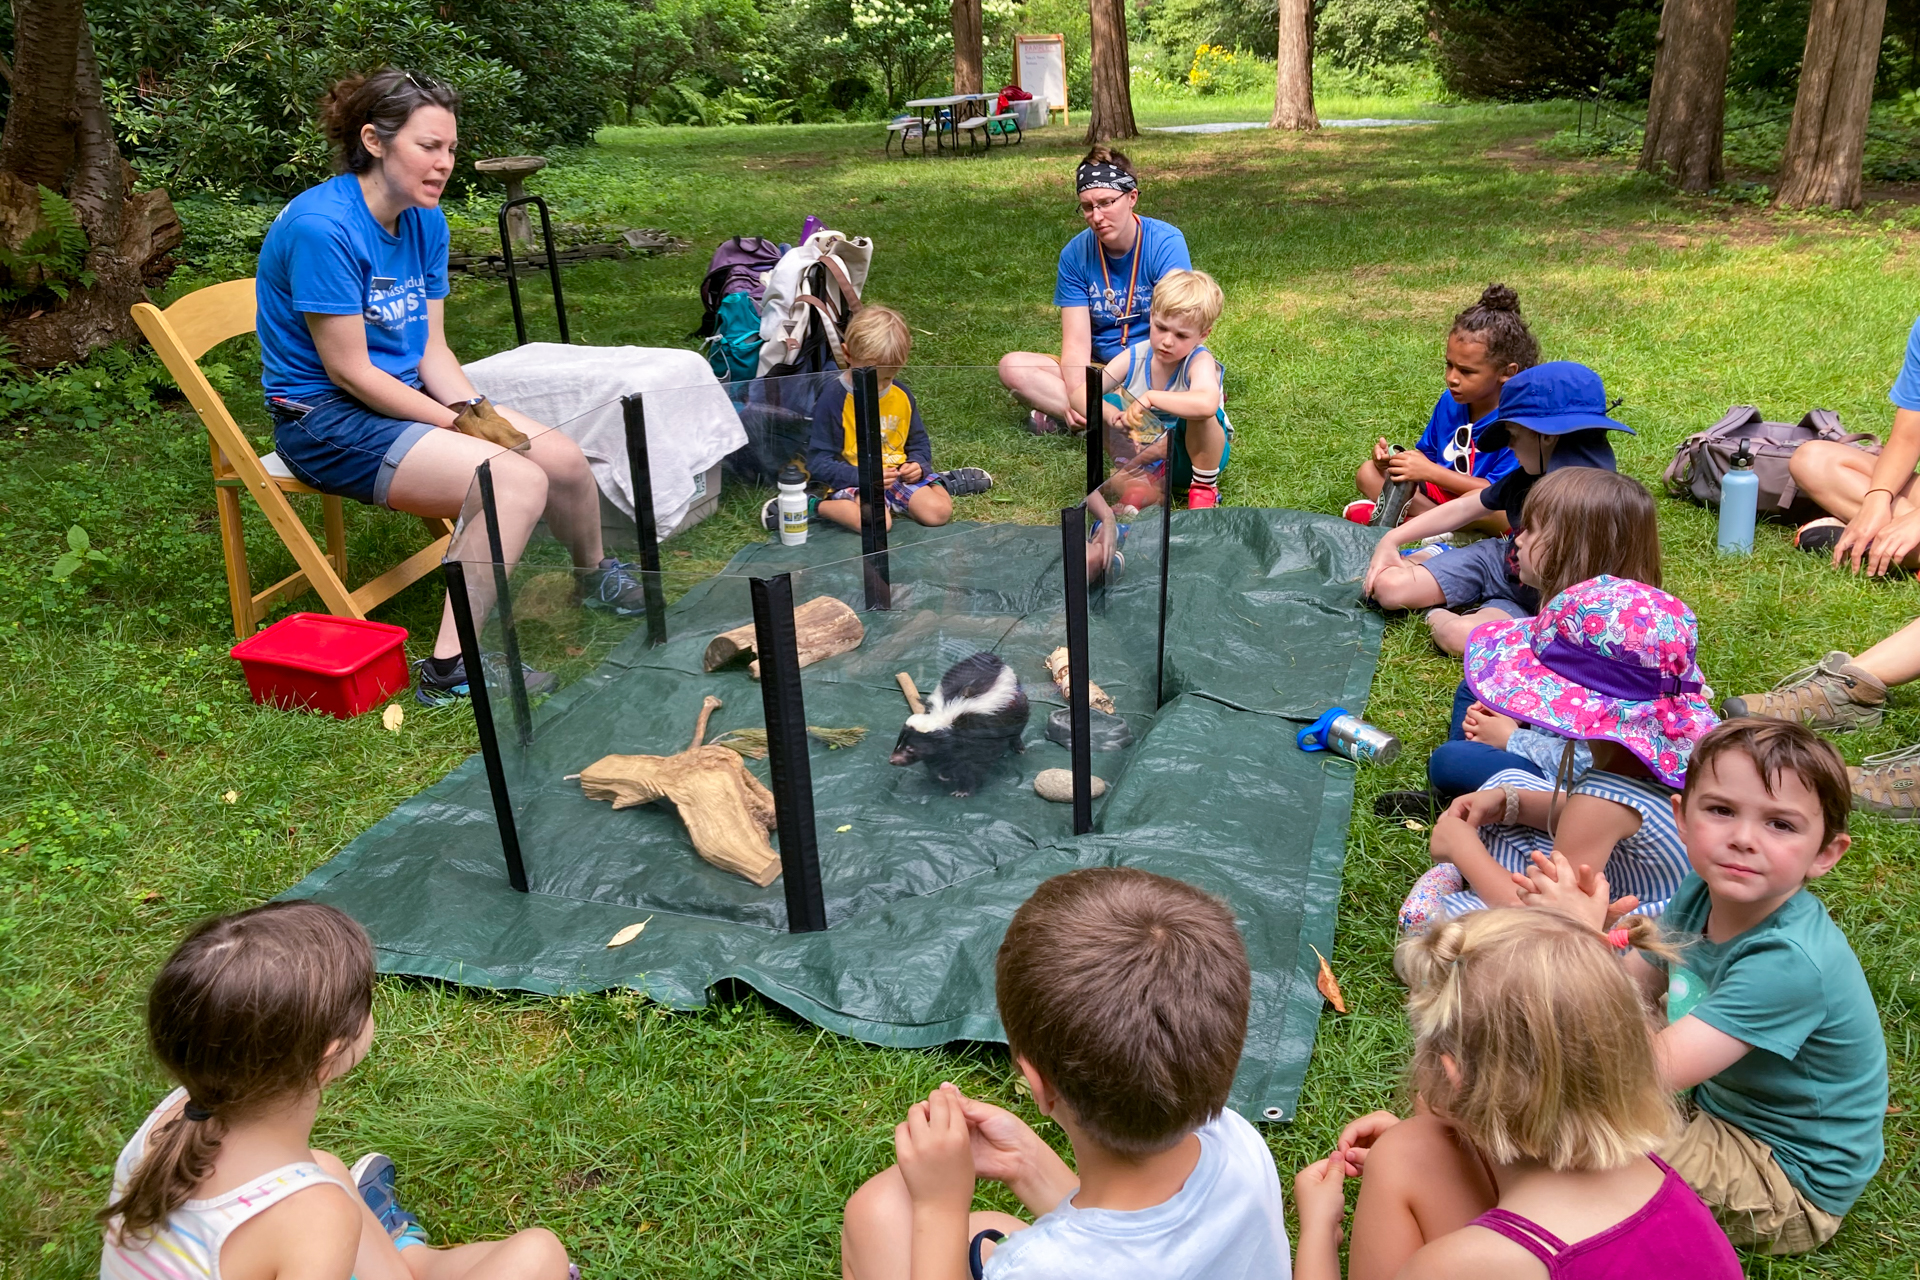 A group of campers at Habitat Nature Camp seated in a half-circle around a skunk inside a small plexiglass enclosure during an Animal Ambassador presentation by a camp educator